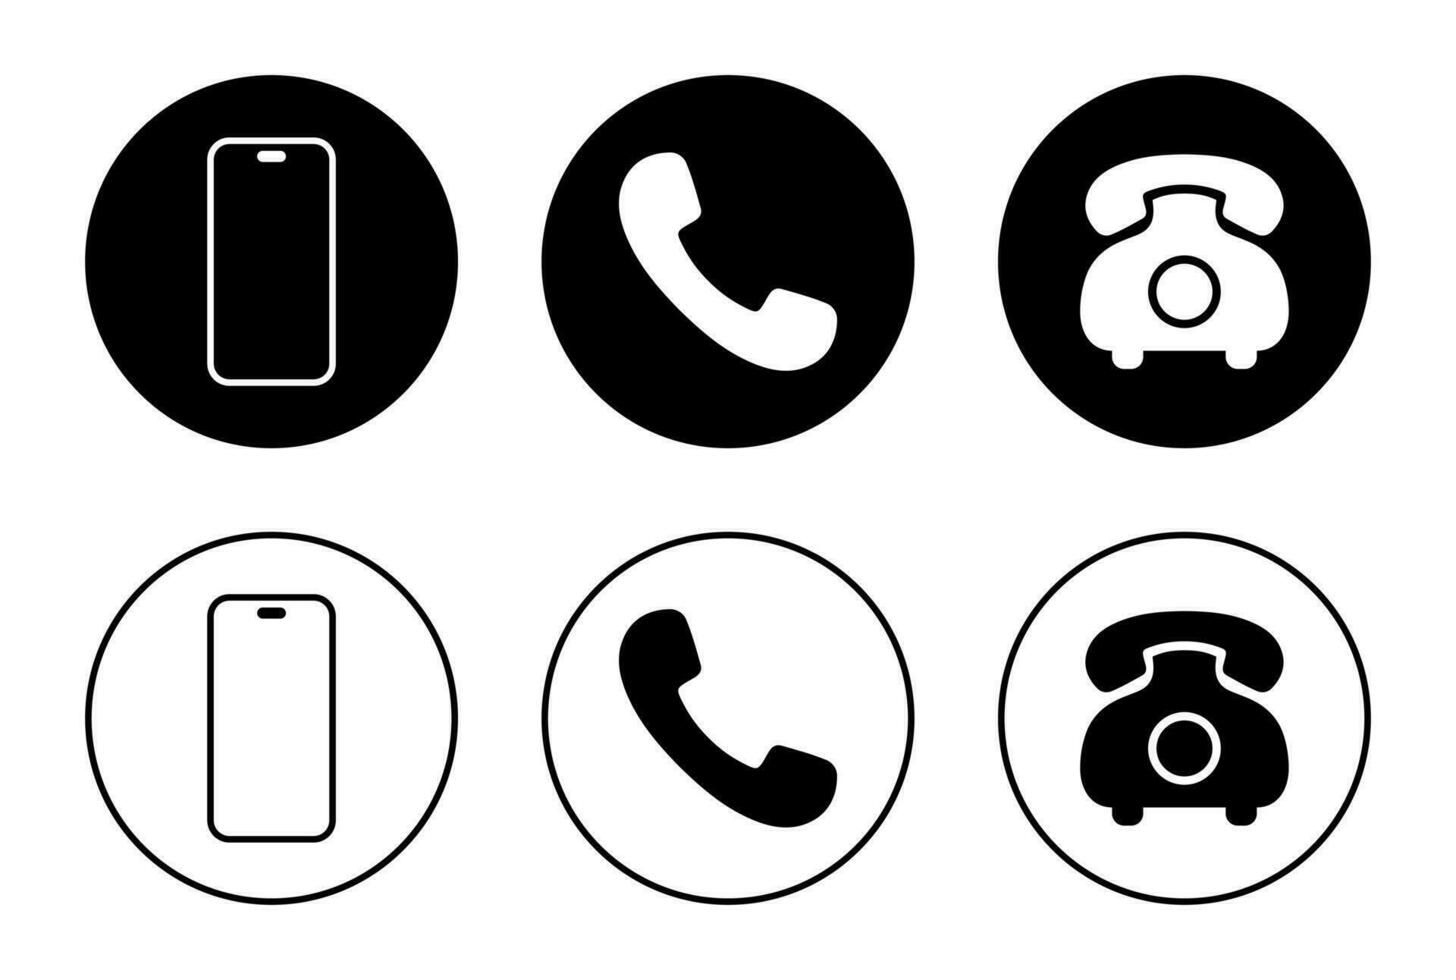 Mobile phone, call, and telephone icon vector. Smartphone gadget sign symbol vector